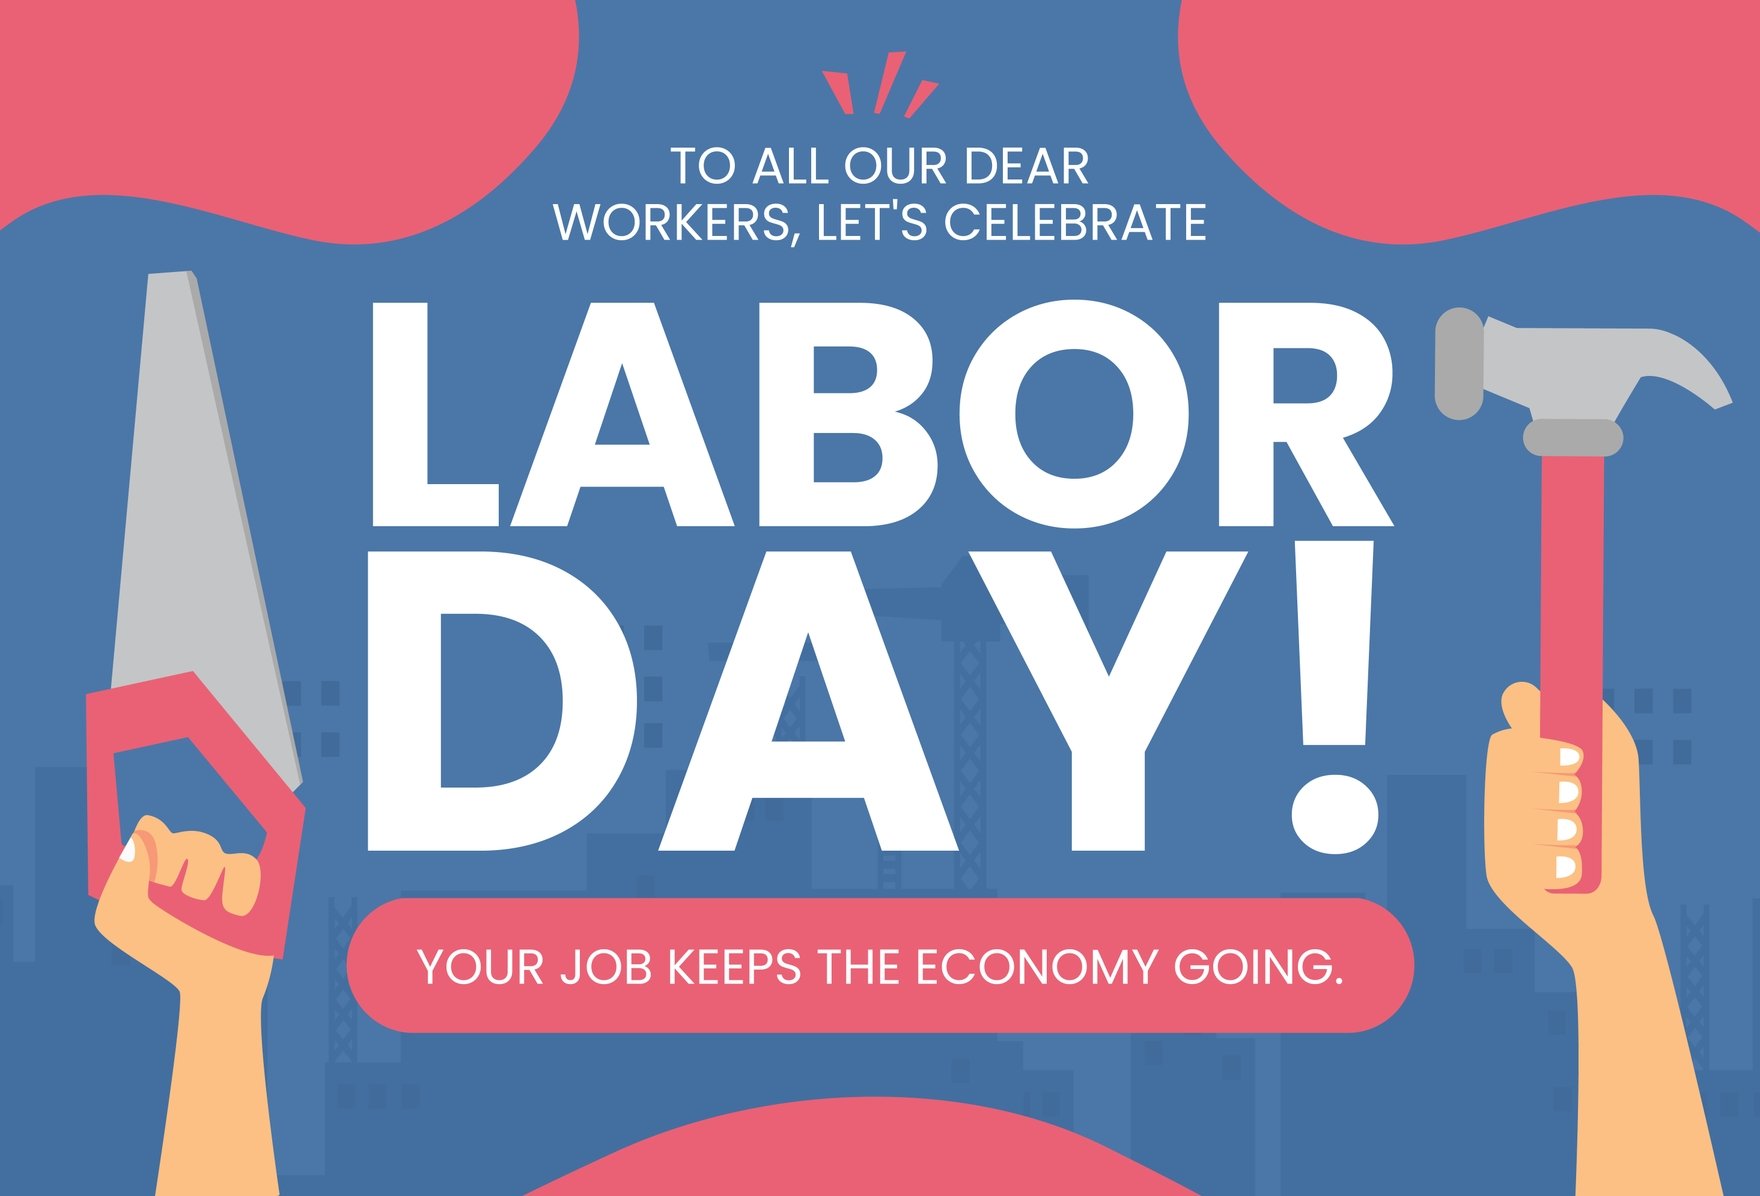 Labor Day Celebration Greeting Card Template in Word, Illustrator, PSD